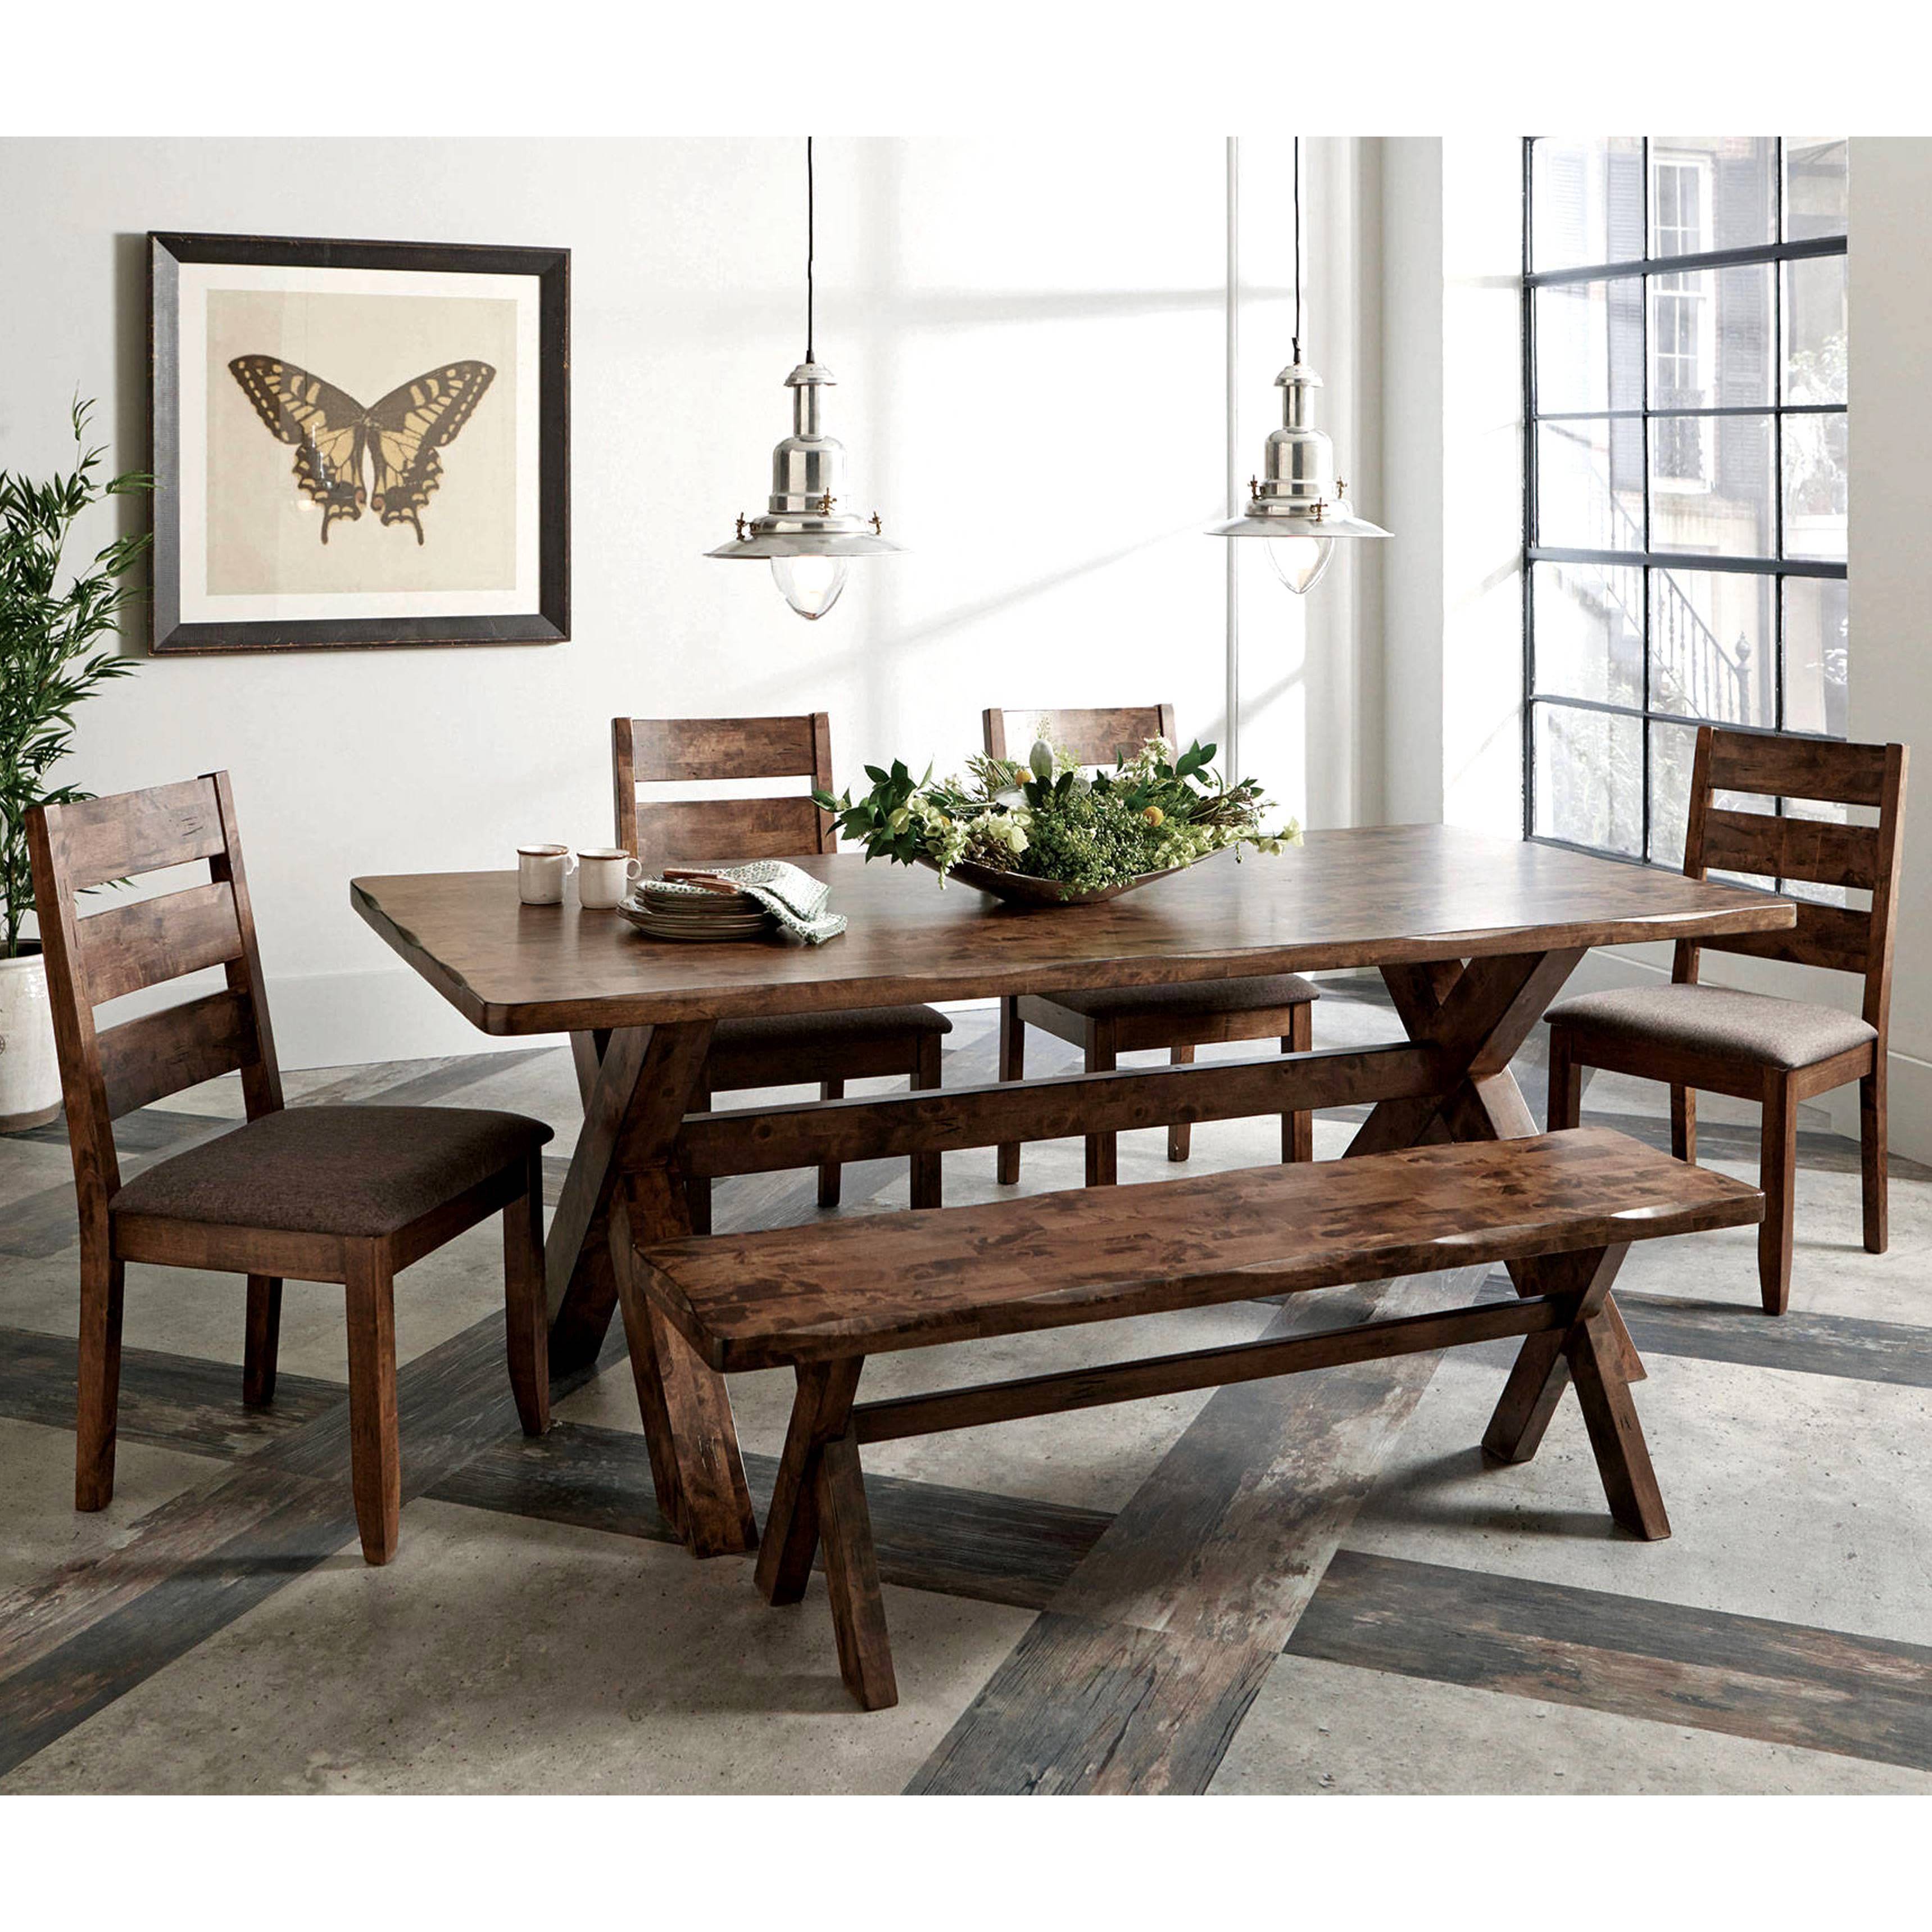 Dining Room Table Country Style Dining Room Ideas